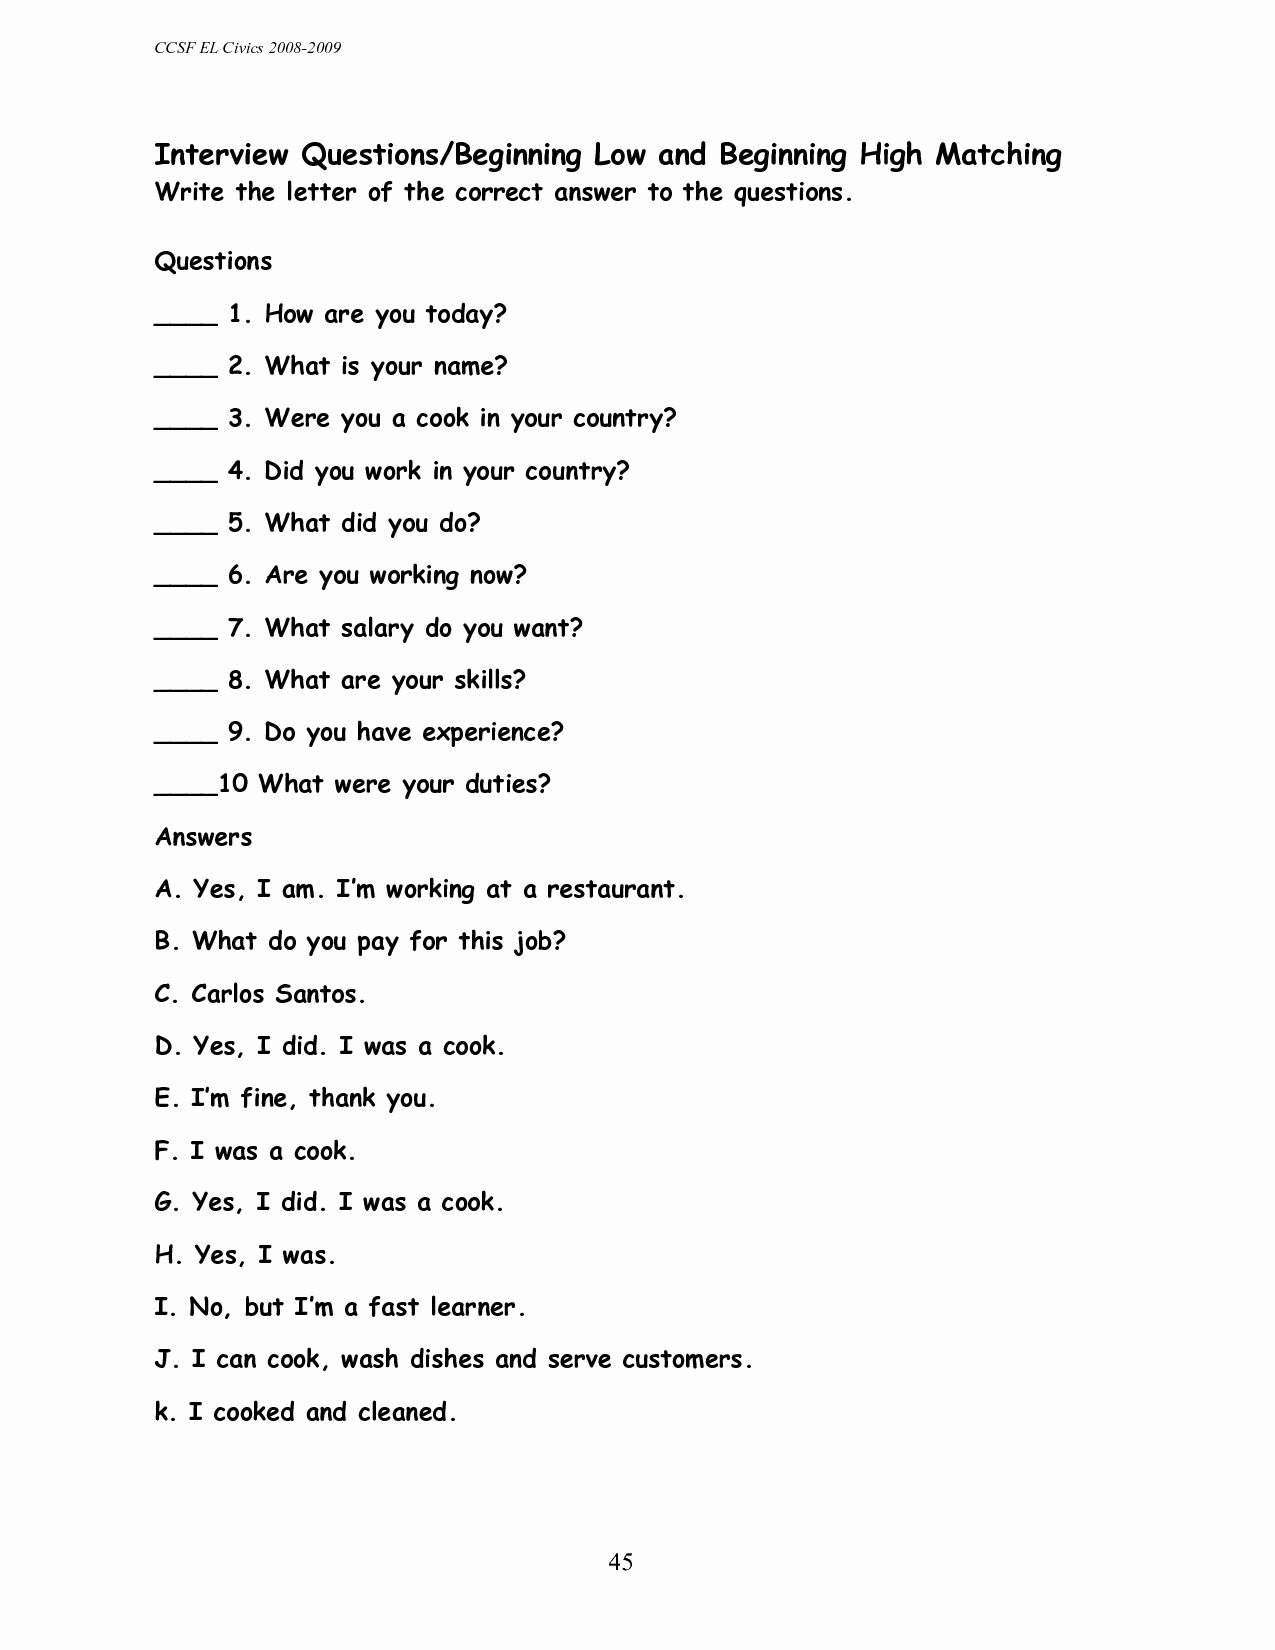 Questions and Answers Template Inspirational Best S Of Interview Questions and Answers Template